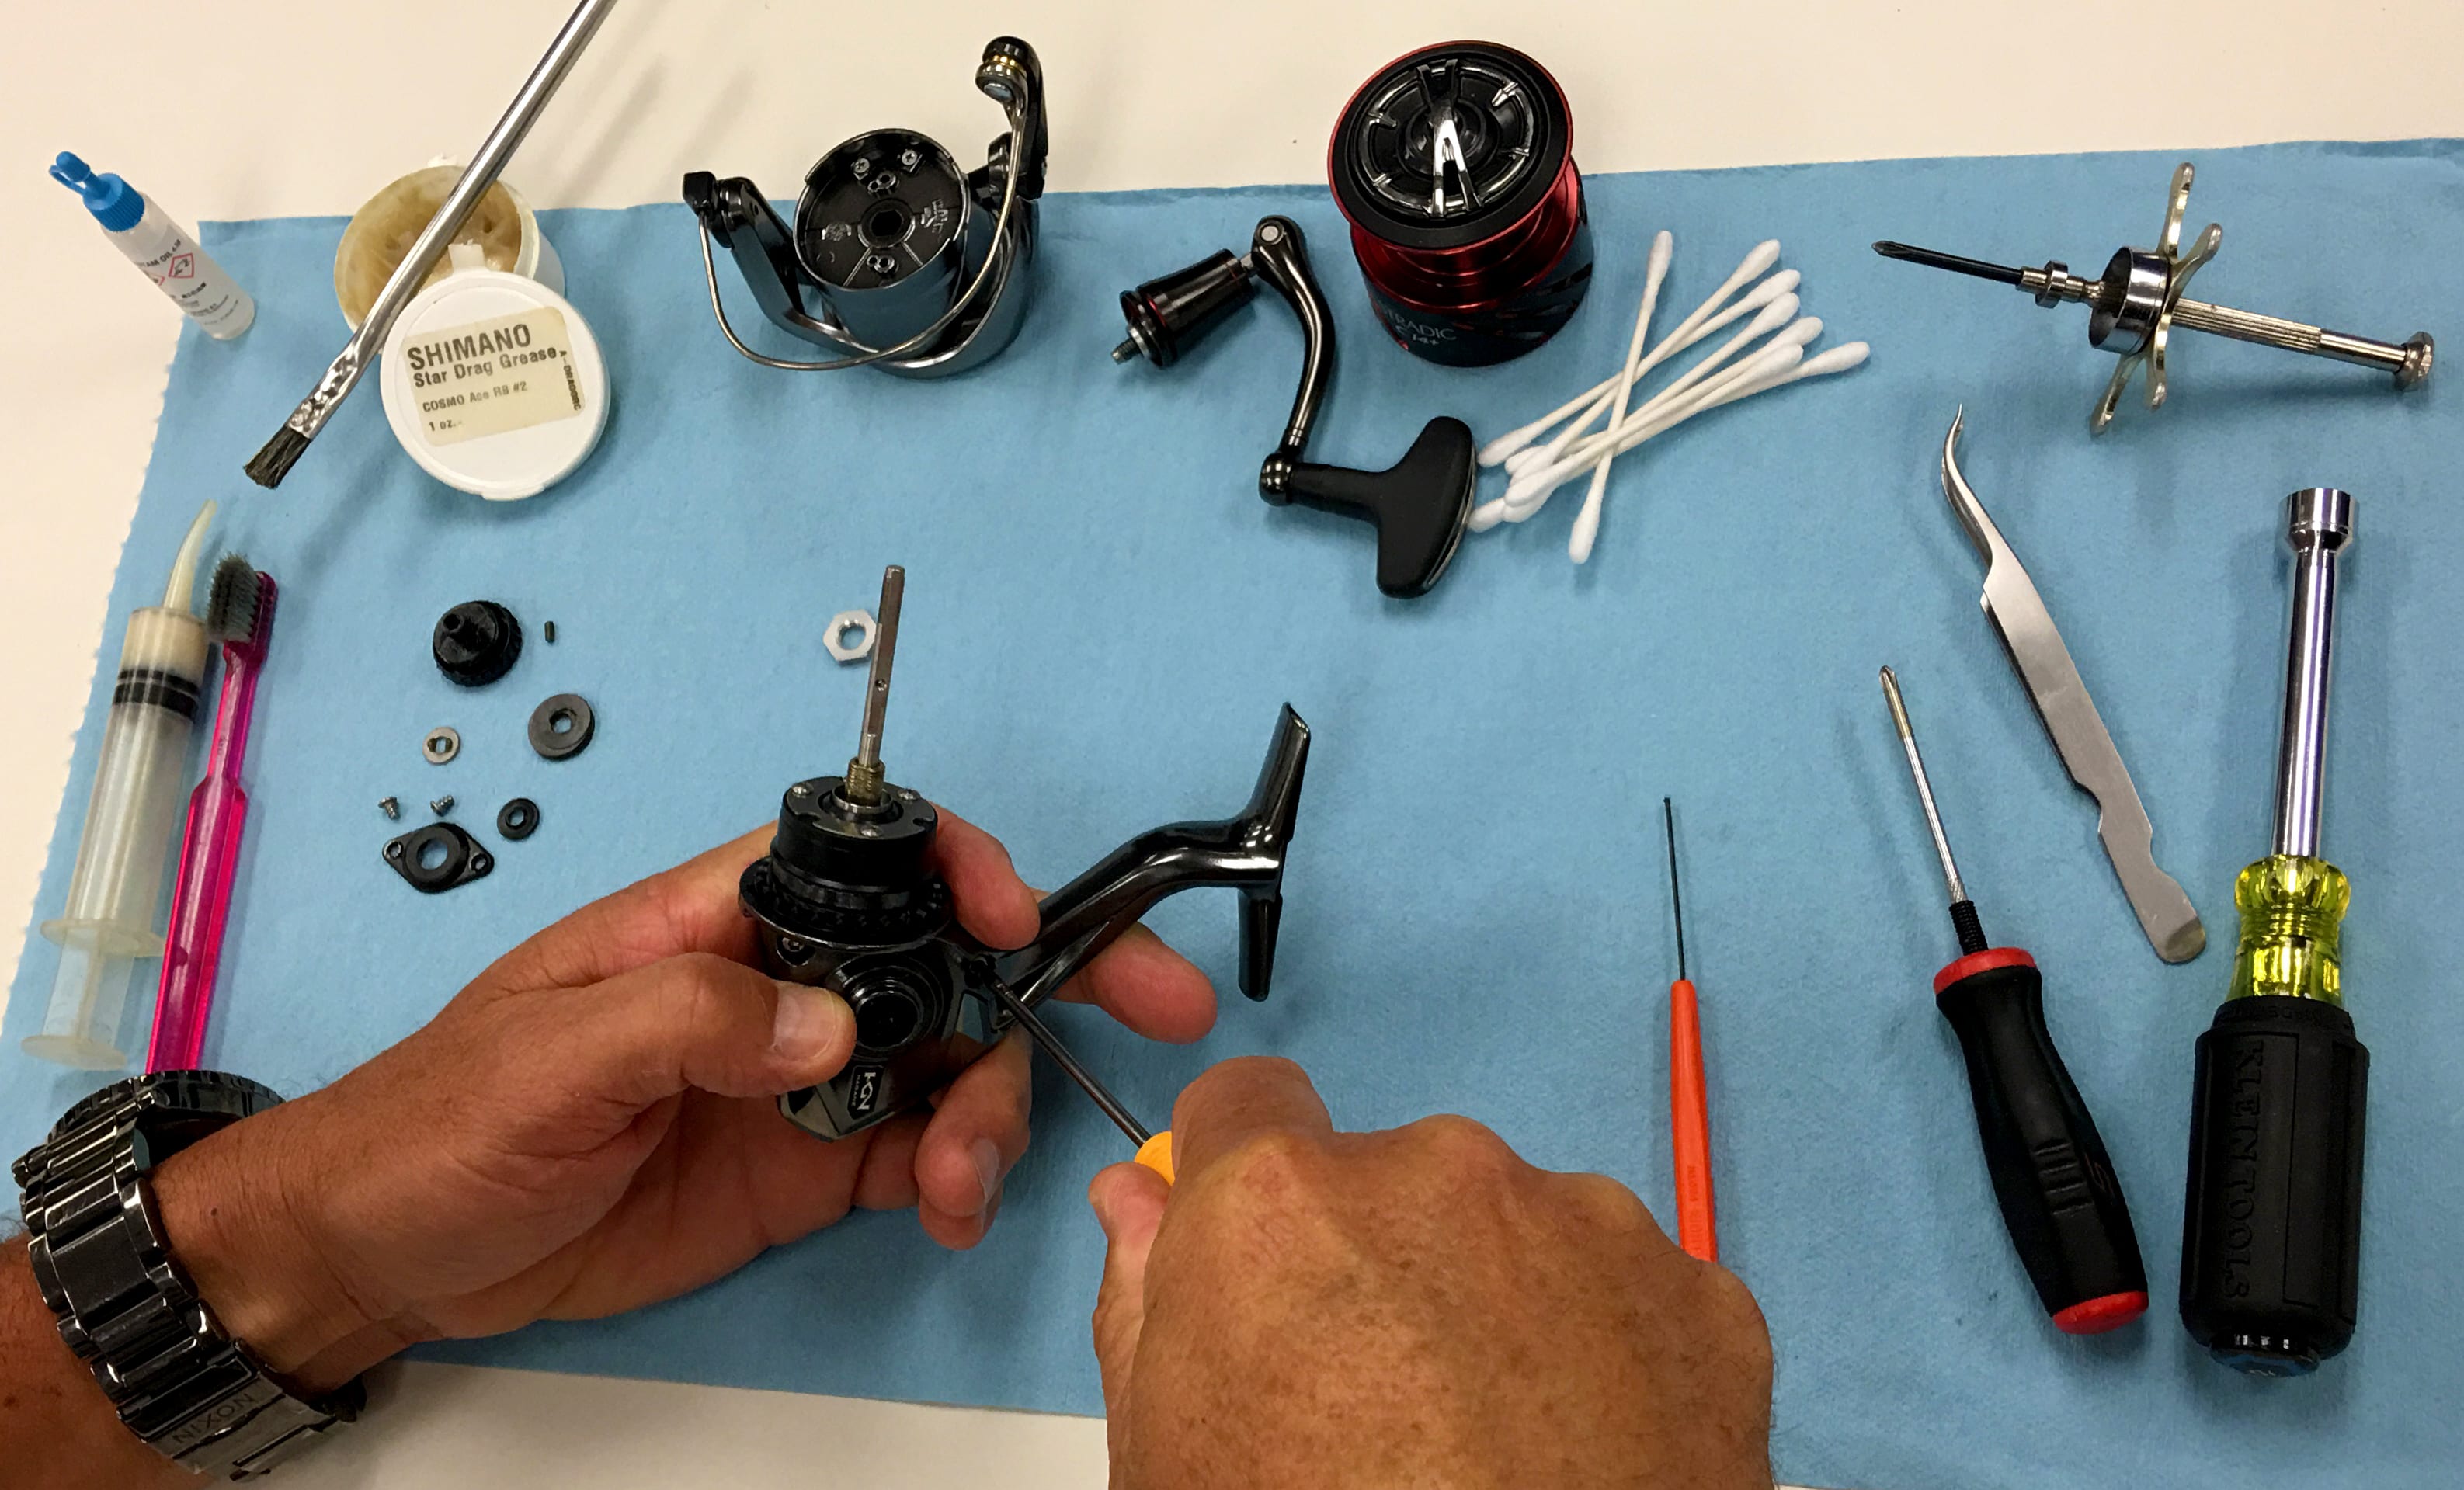 Shimano Reel Servicing with aftermarket